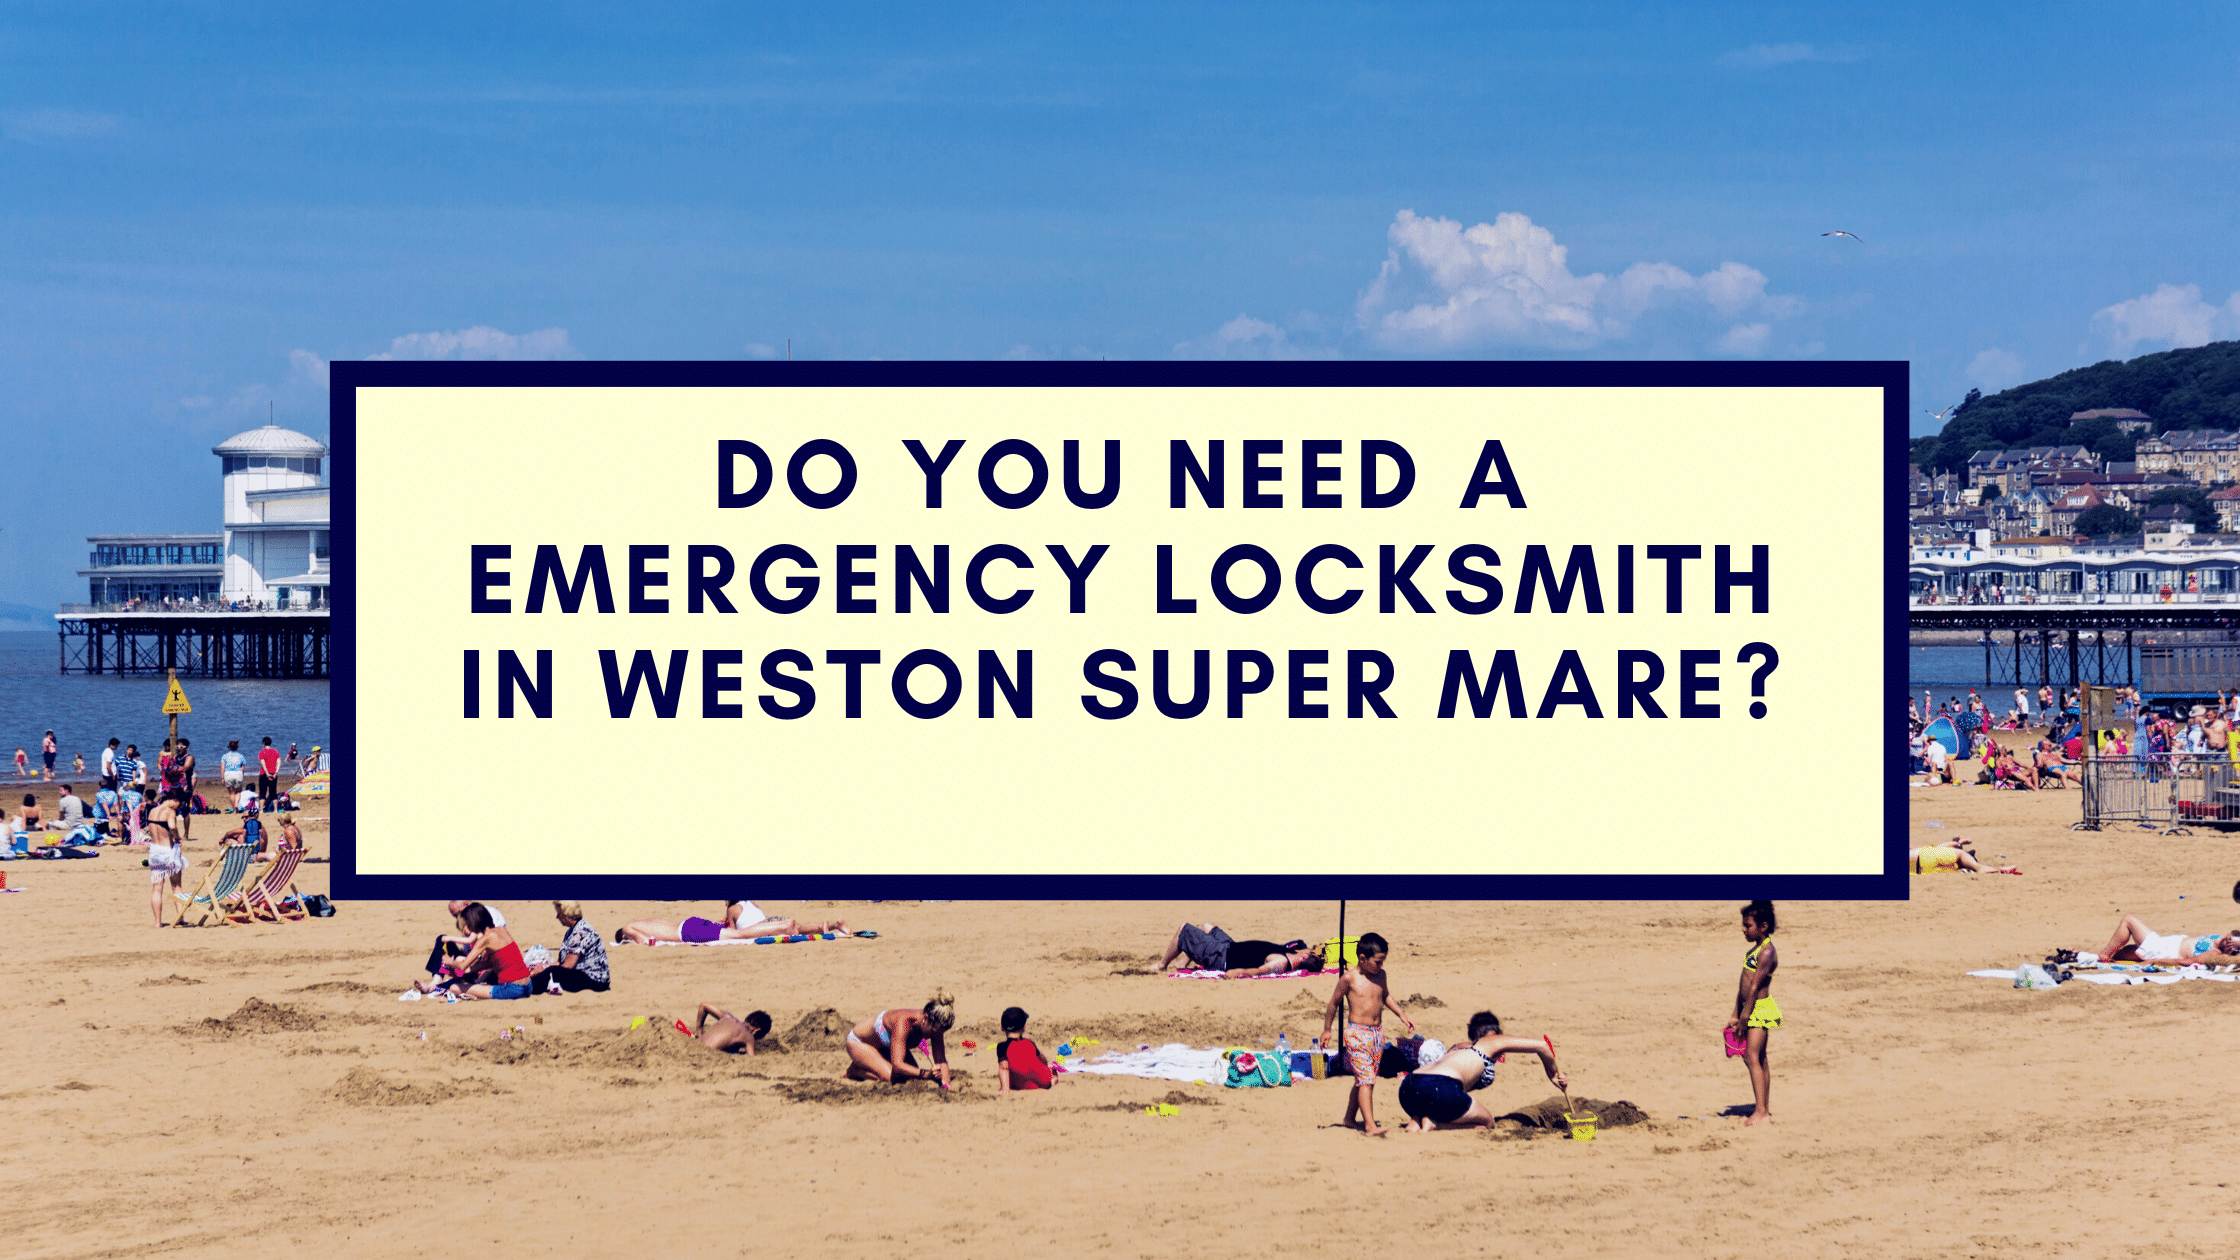 Do You Need A Emergency Locksmith in Weston Super Mare?